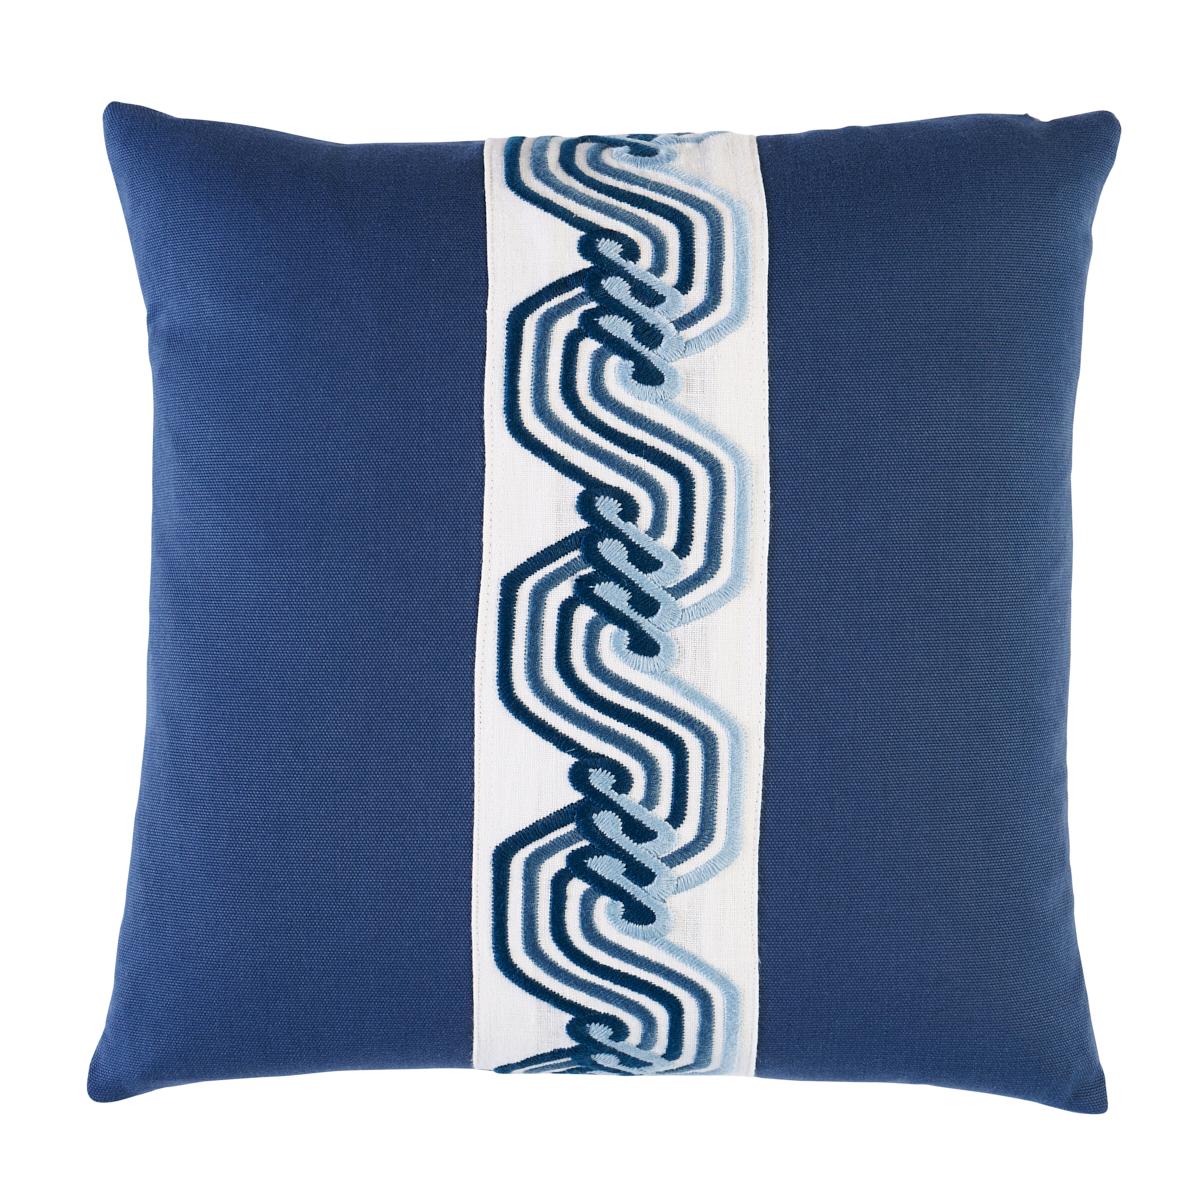 The Twist Embroidered Pillow 16"